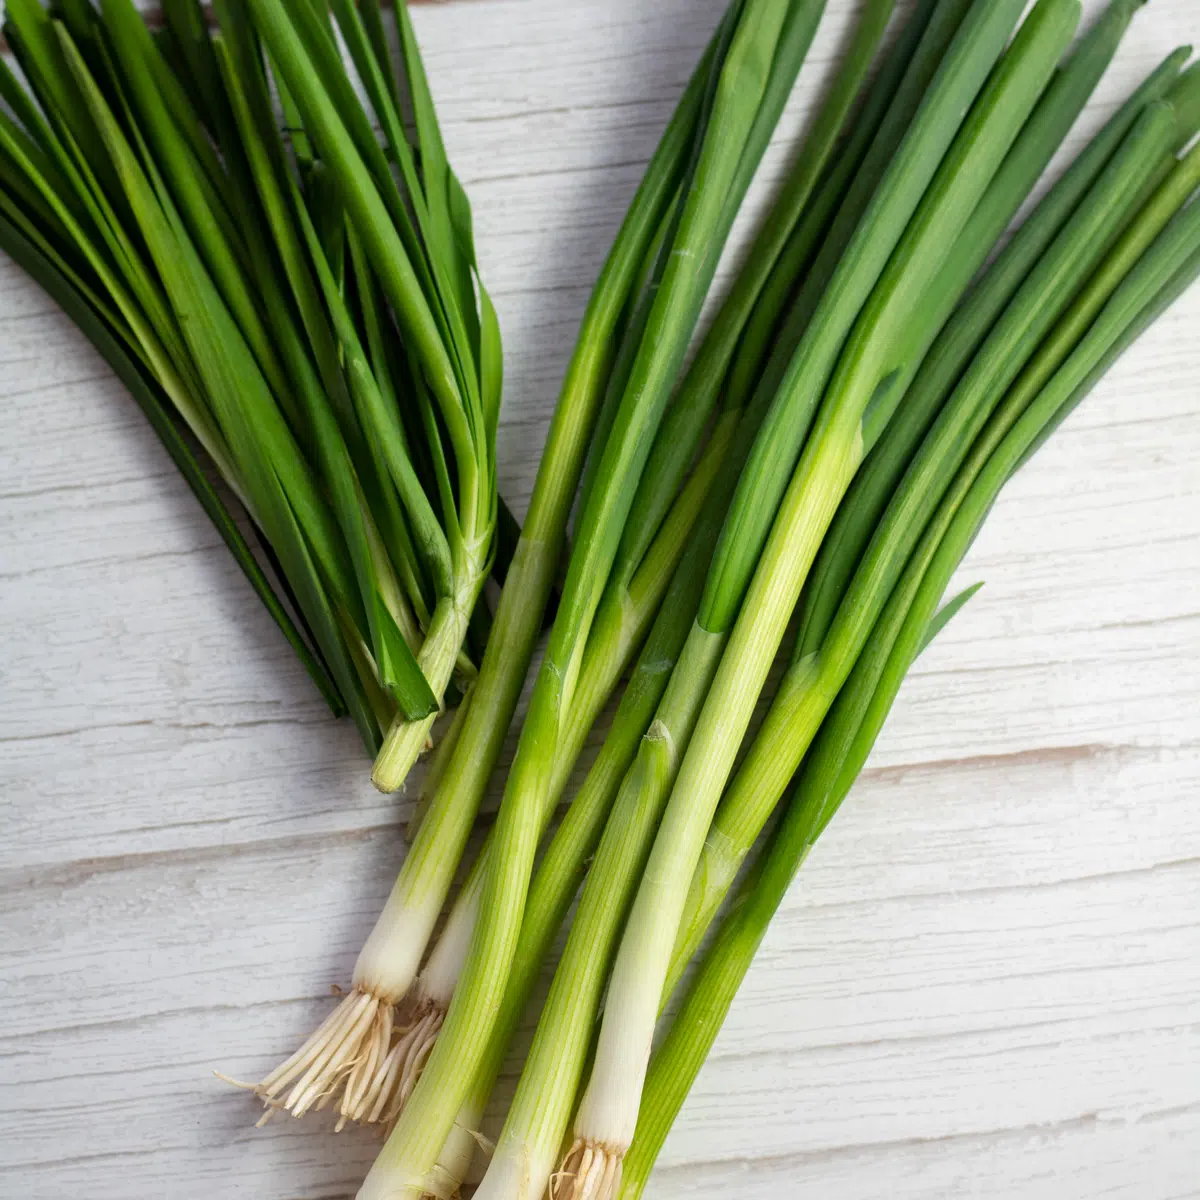 Green Onions vs Chives, What's the Difference Between The Tasty Greens